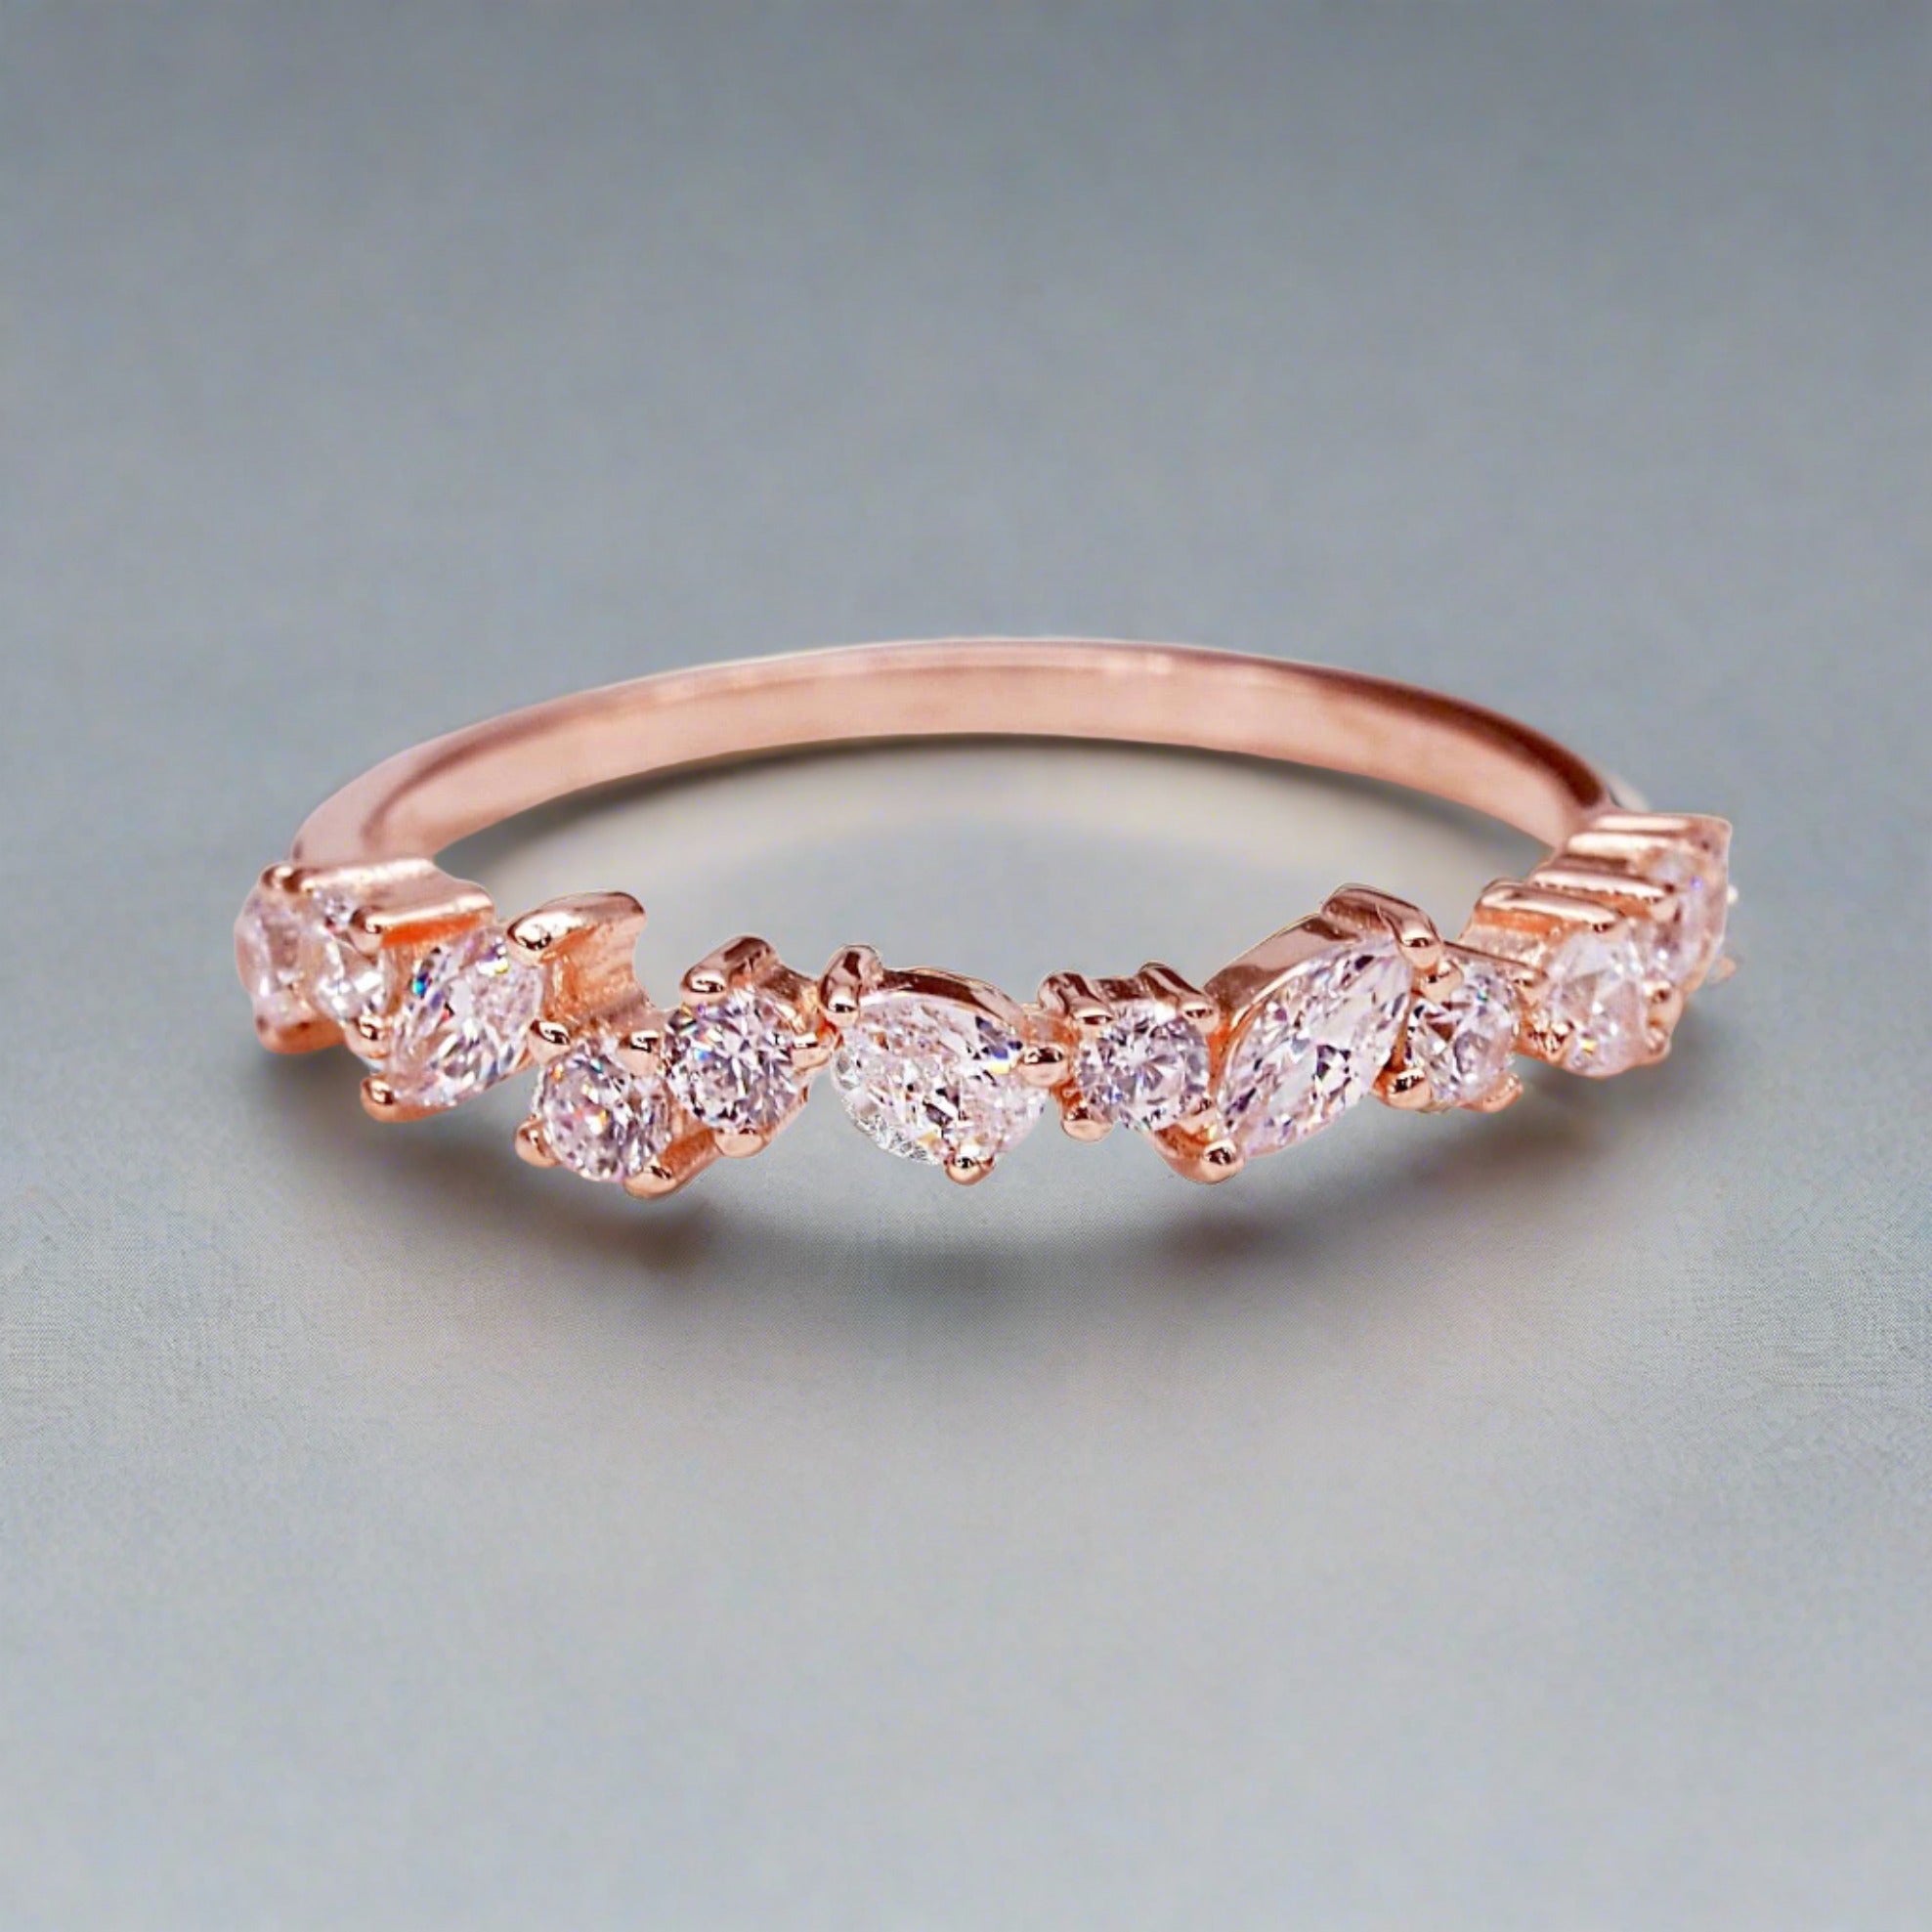 Rose Gold 'Cetus' Ring - womens jewellery by indie and harper